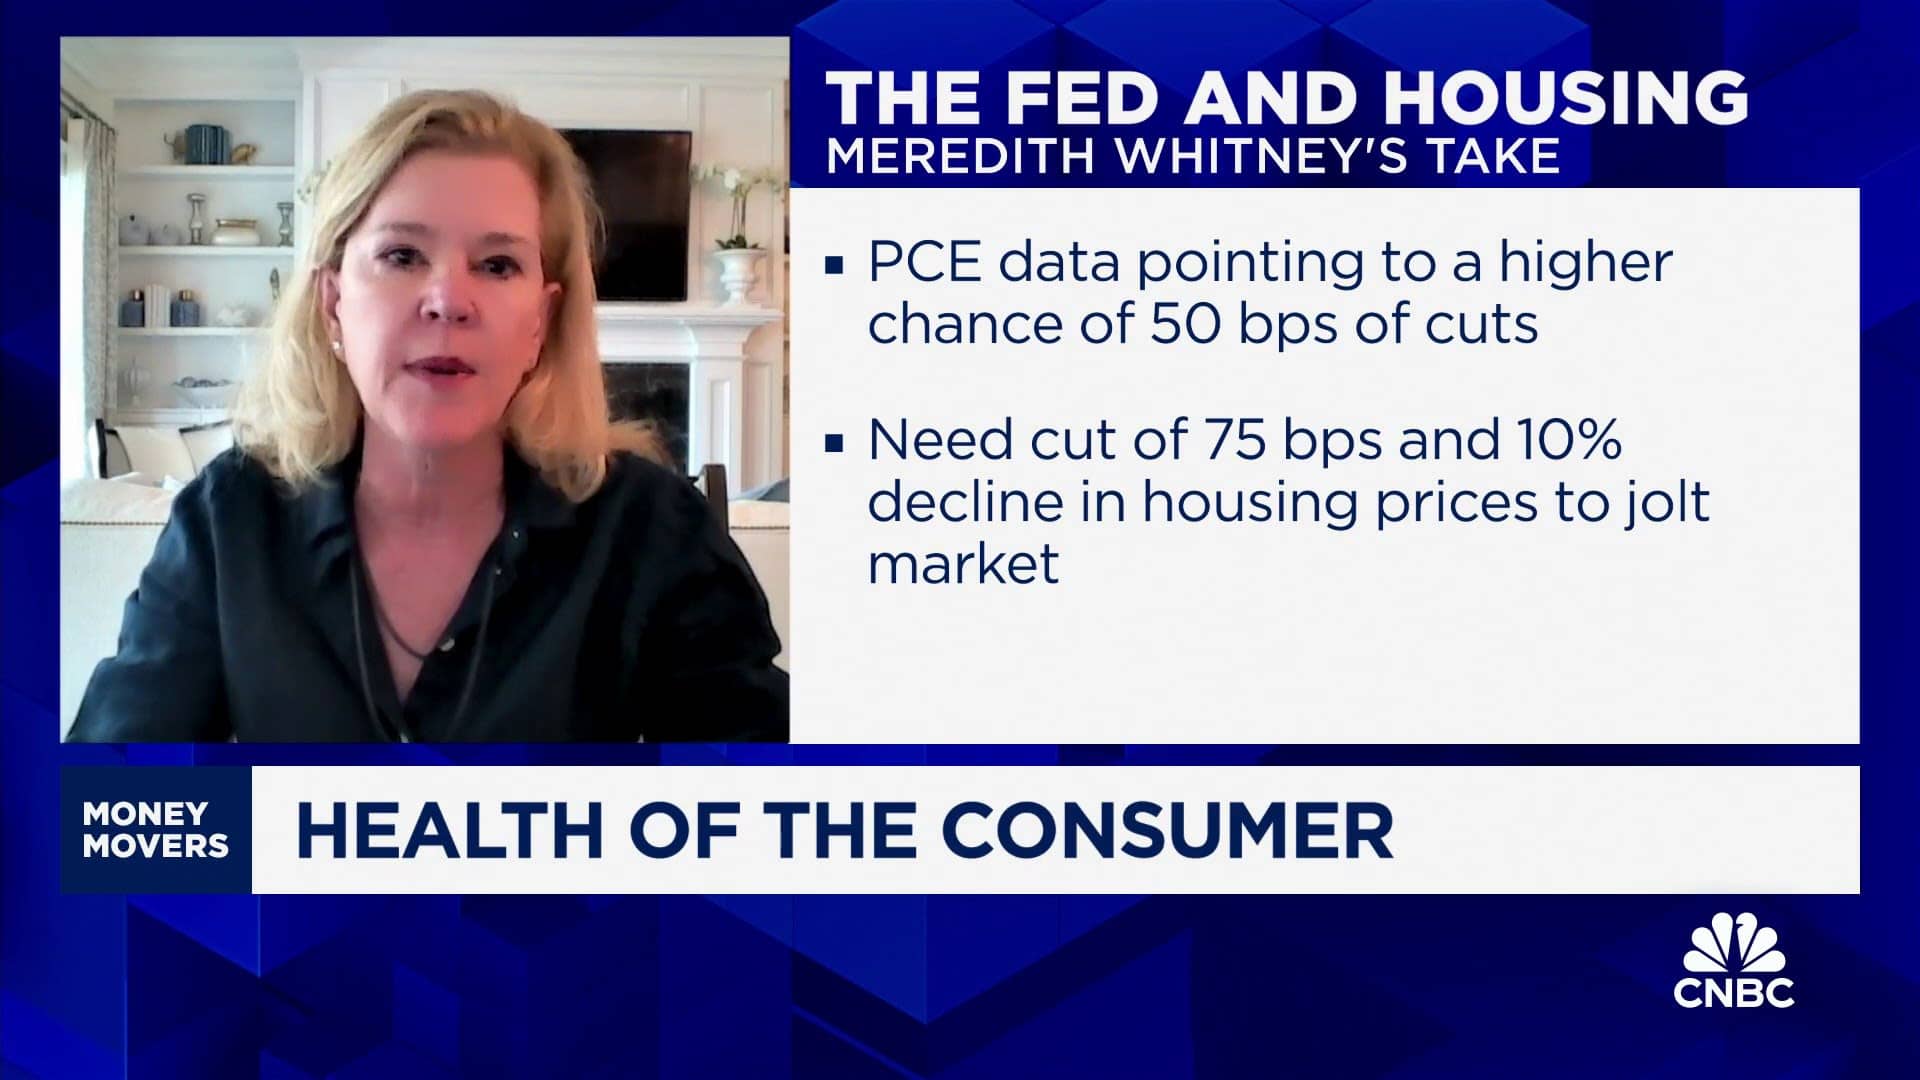 Consumers are struggling, home equity access can be resourceful, says Meredith Whitney